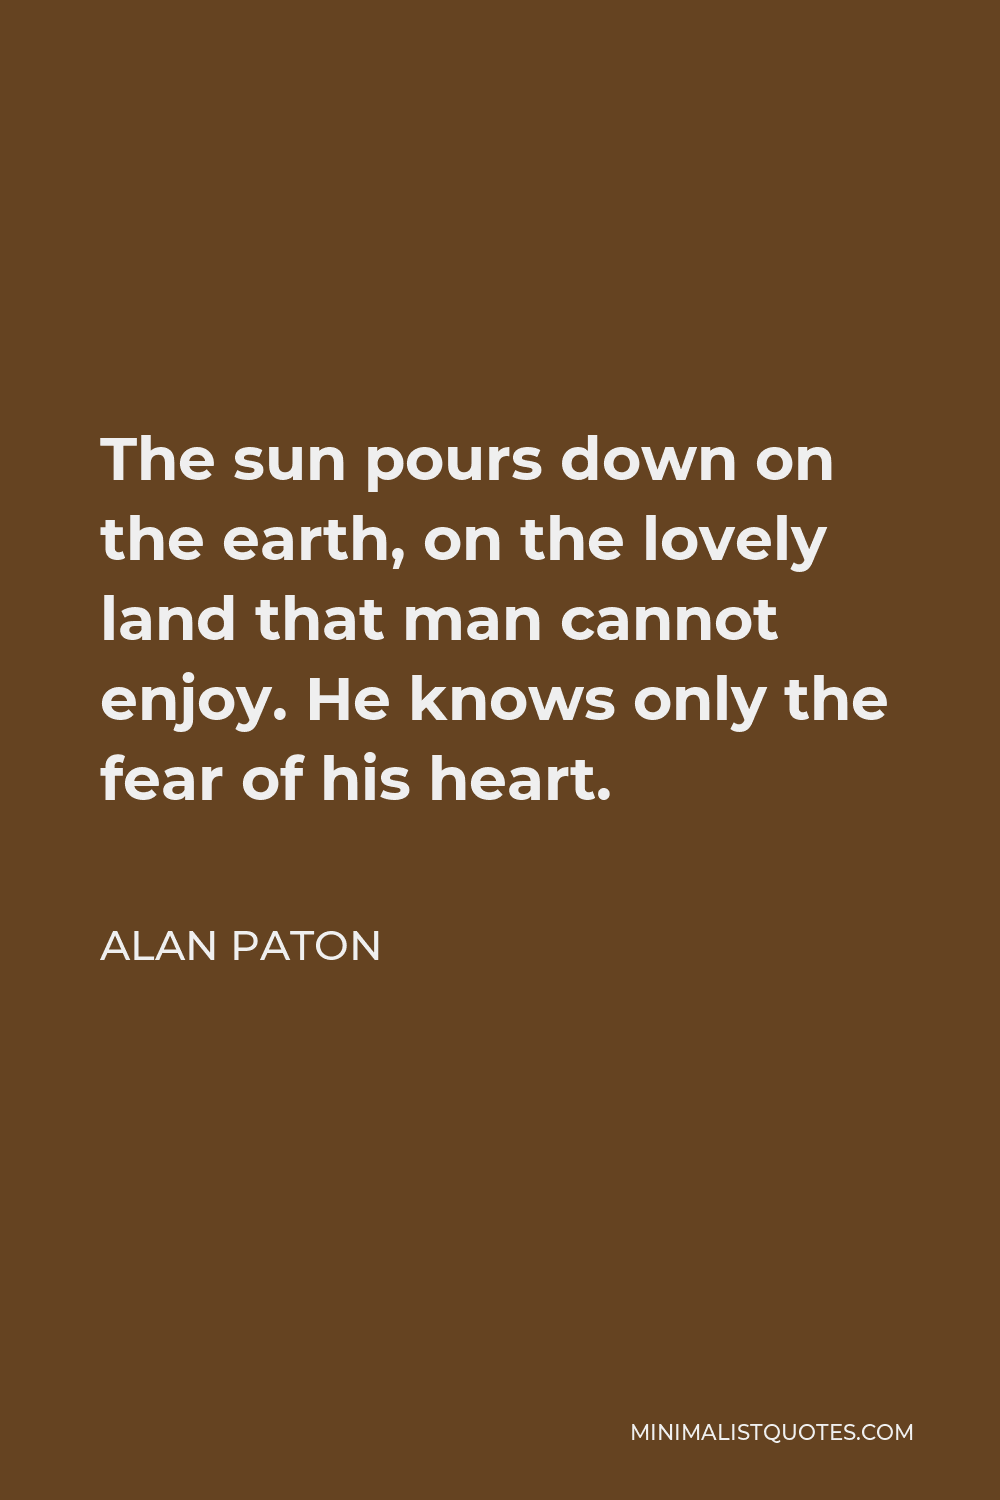 Alan Paton Quote - The sun pours down on the earth, on the lovely land that man cannot enjoy. He knows only the fear of his heart.